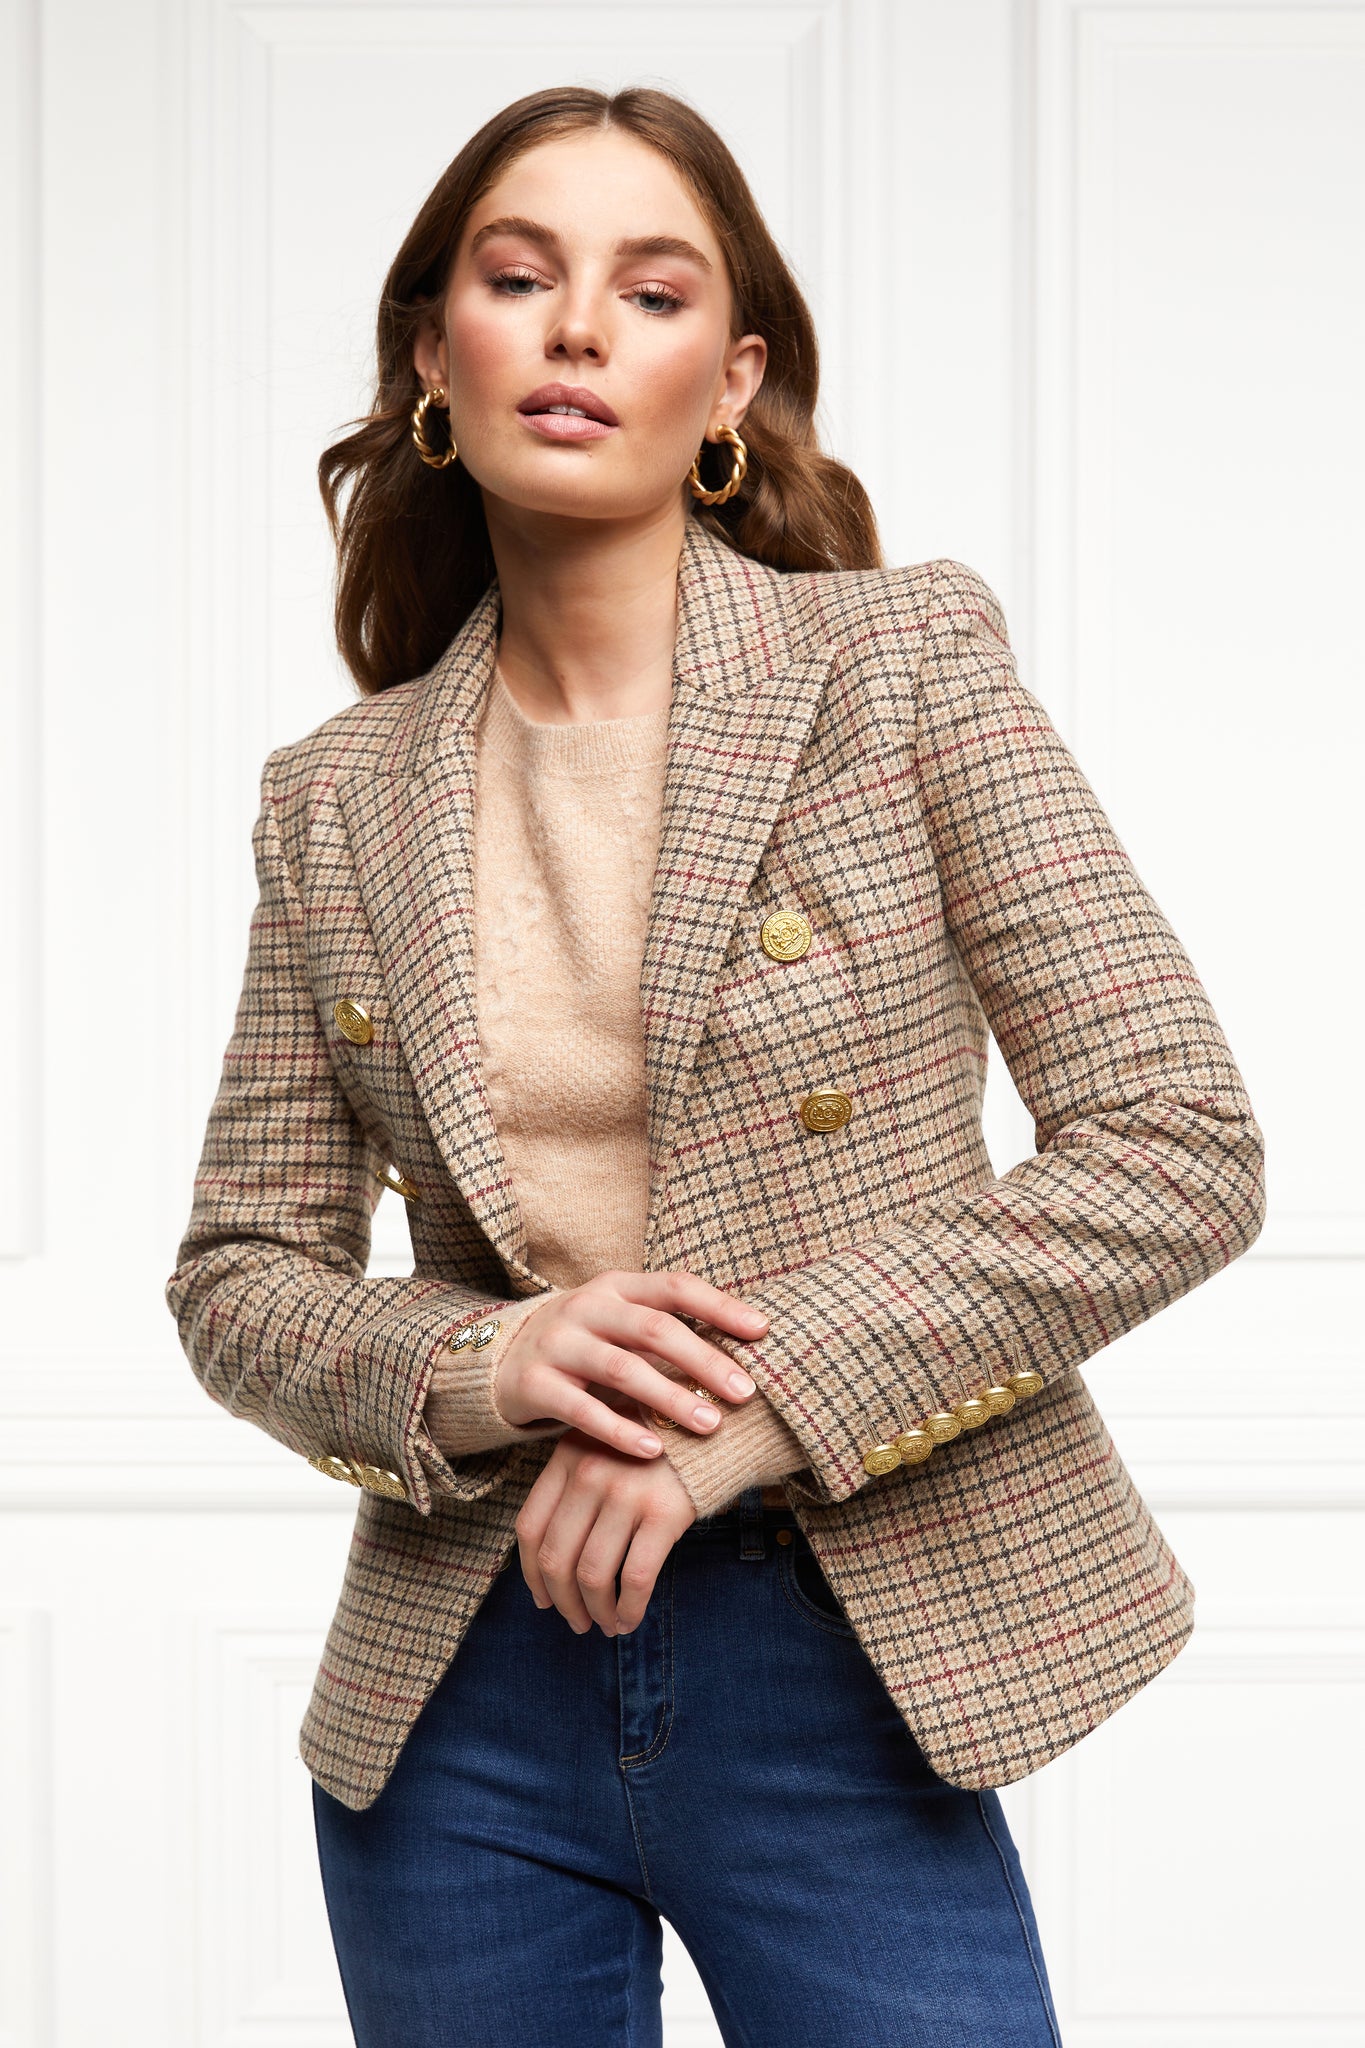 British made double breasted blazer that fastens with a single button hole to create a more form fitting silhouette with two pockets and gold button detailing this blazer is made from camel black and red check charleton tweed